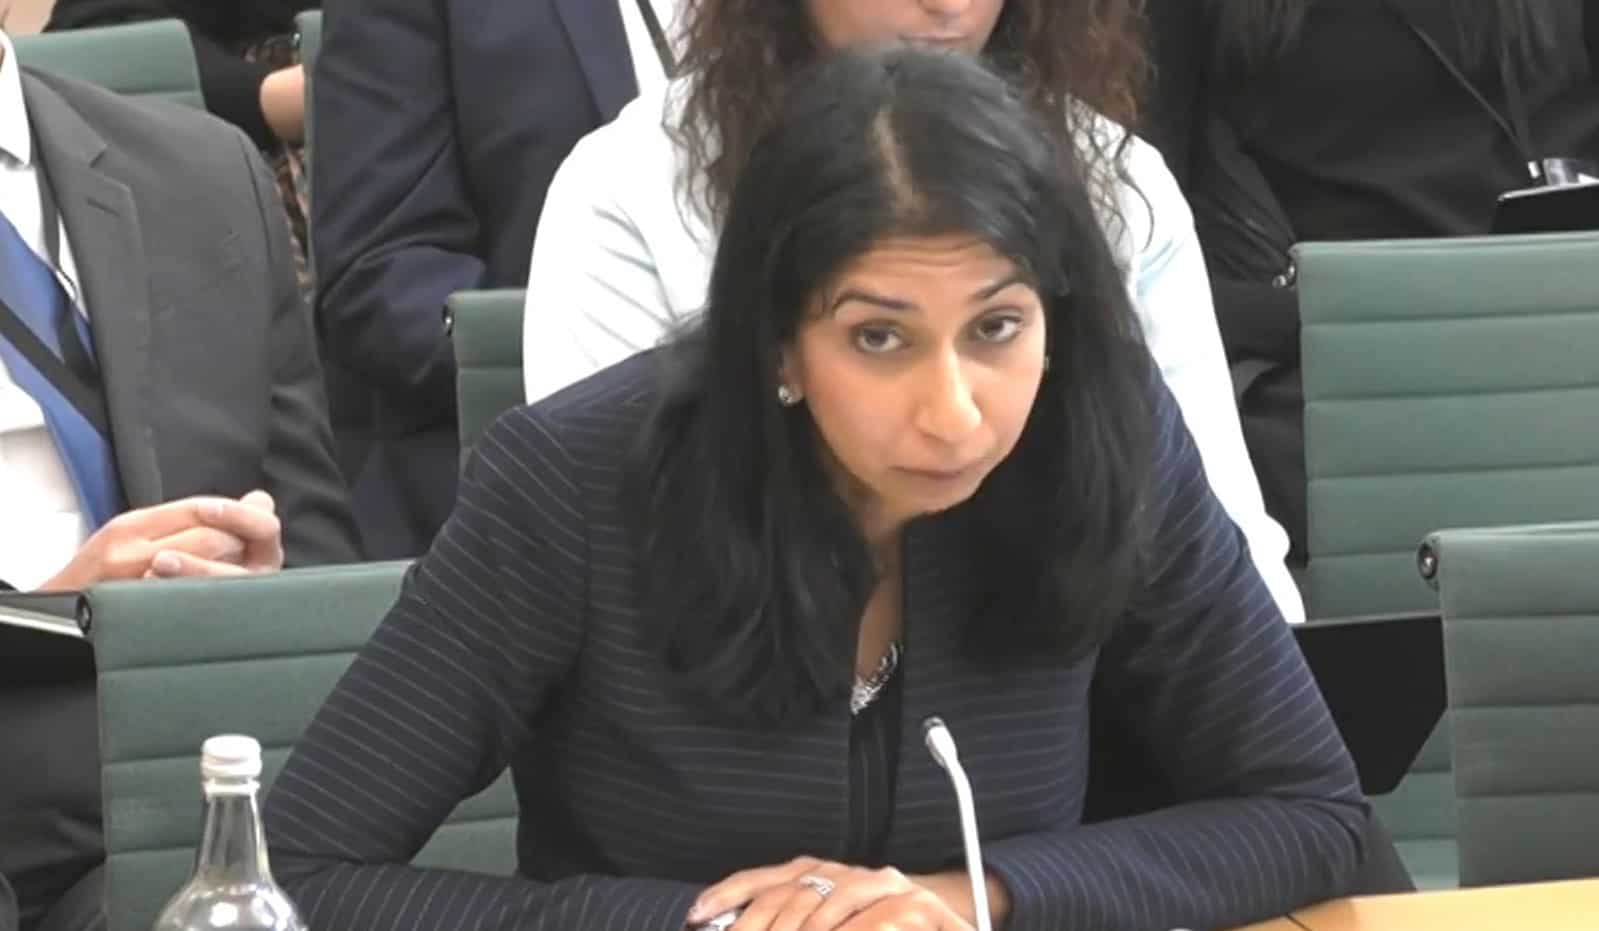 Braverman ‘out of her depth’ after being quizzed over asylum policy – critics